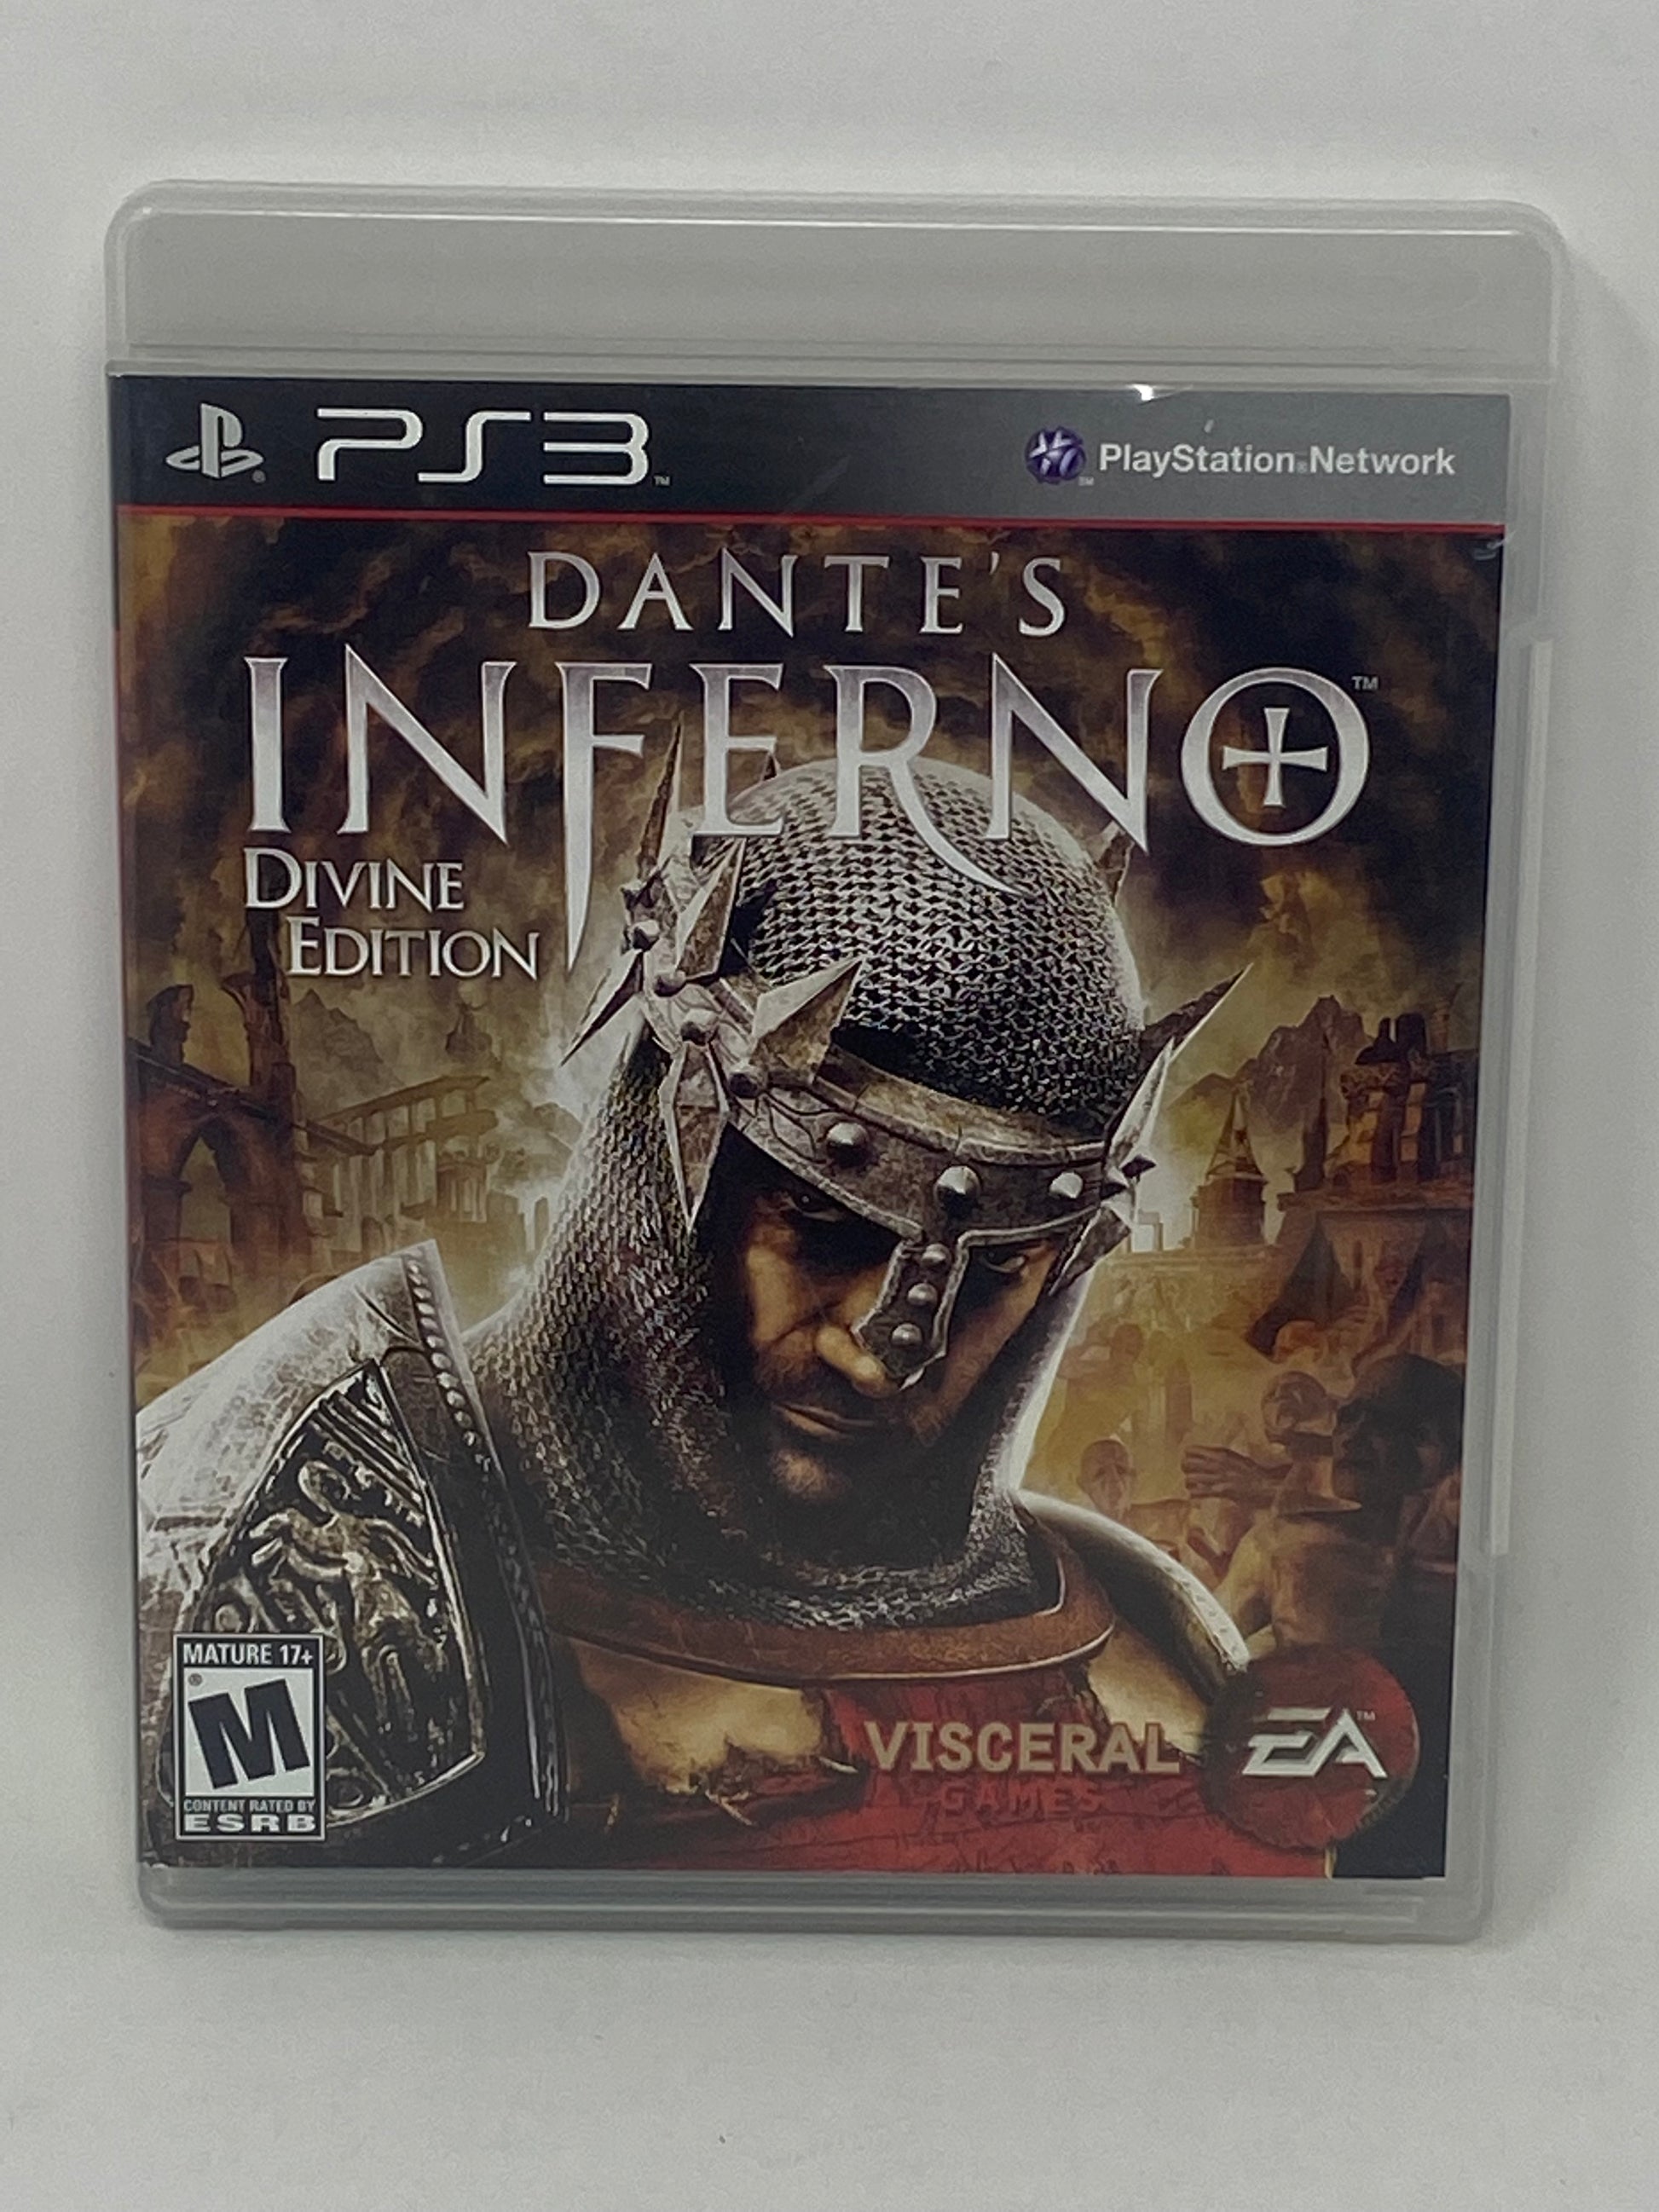 Dante's Inferno Divine Ed PS3 PlayStation 3 AD - (See Pics)